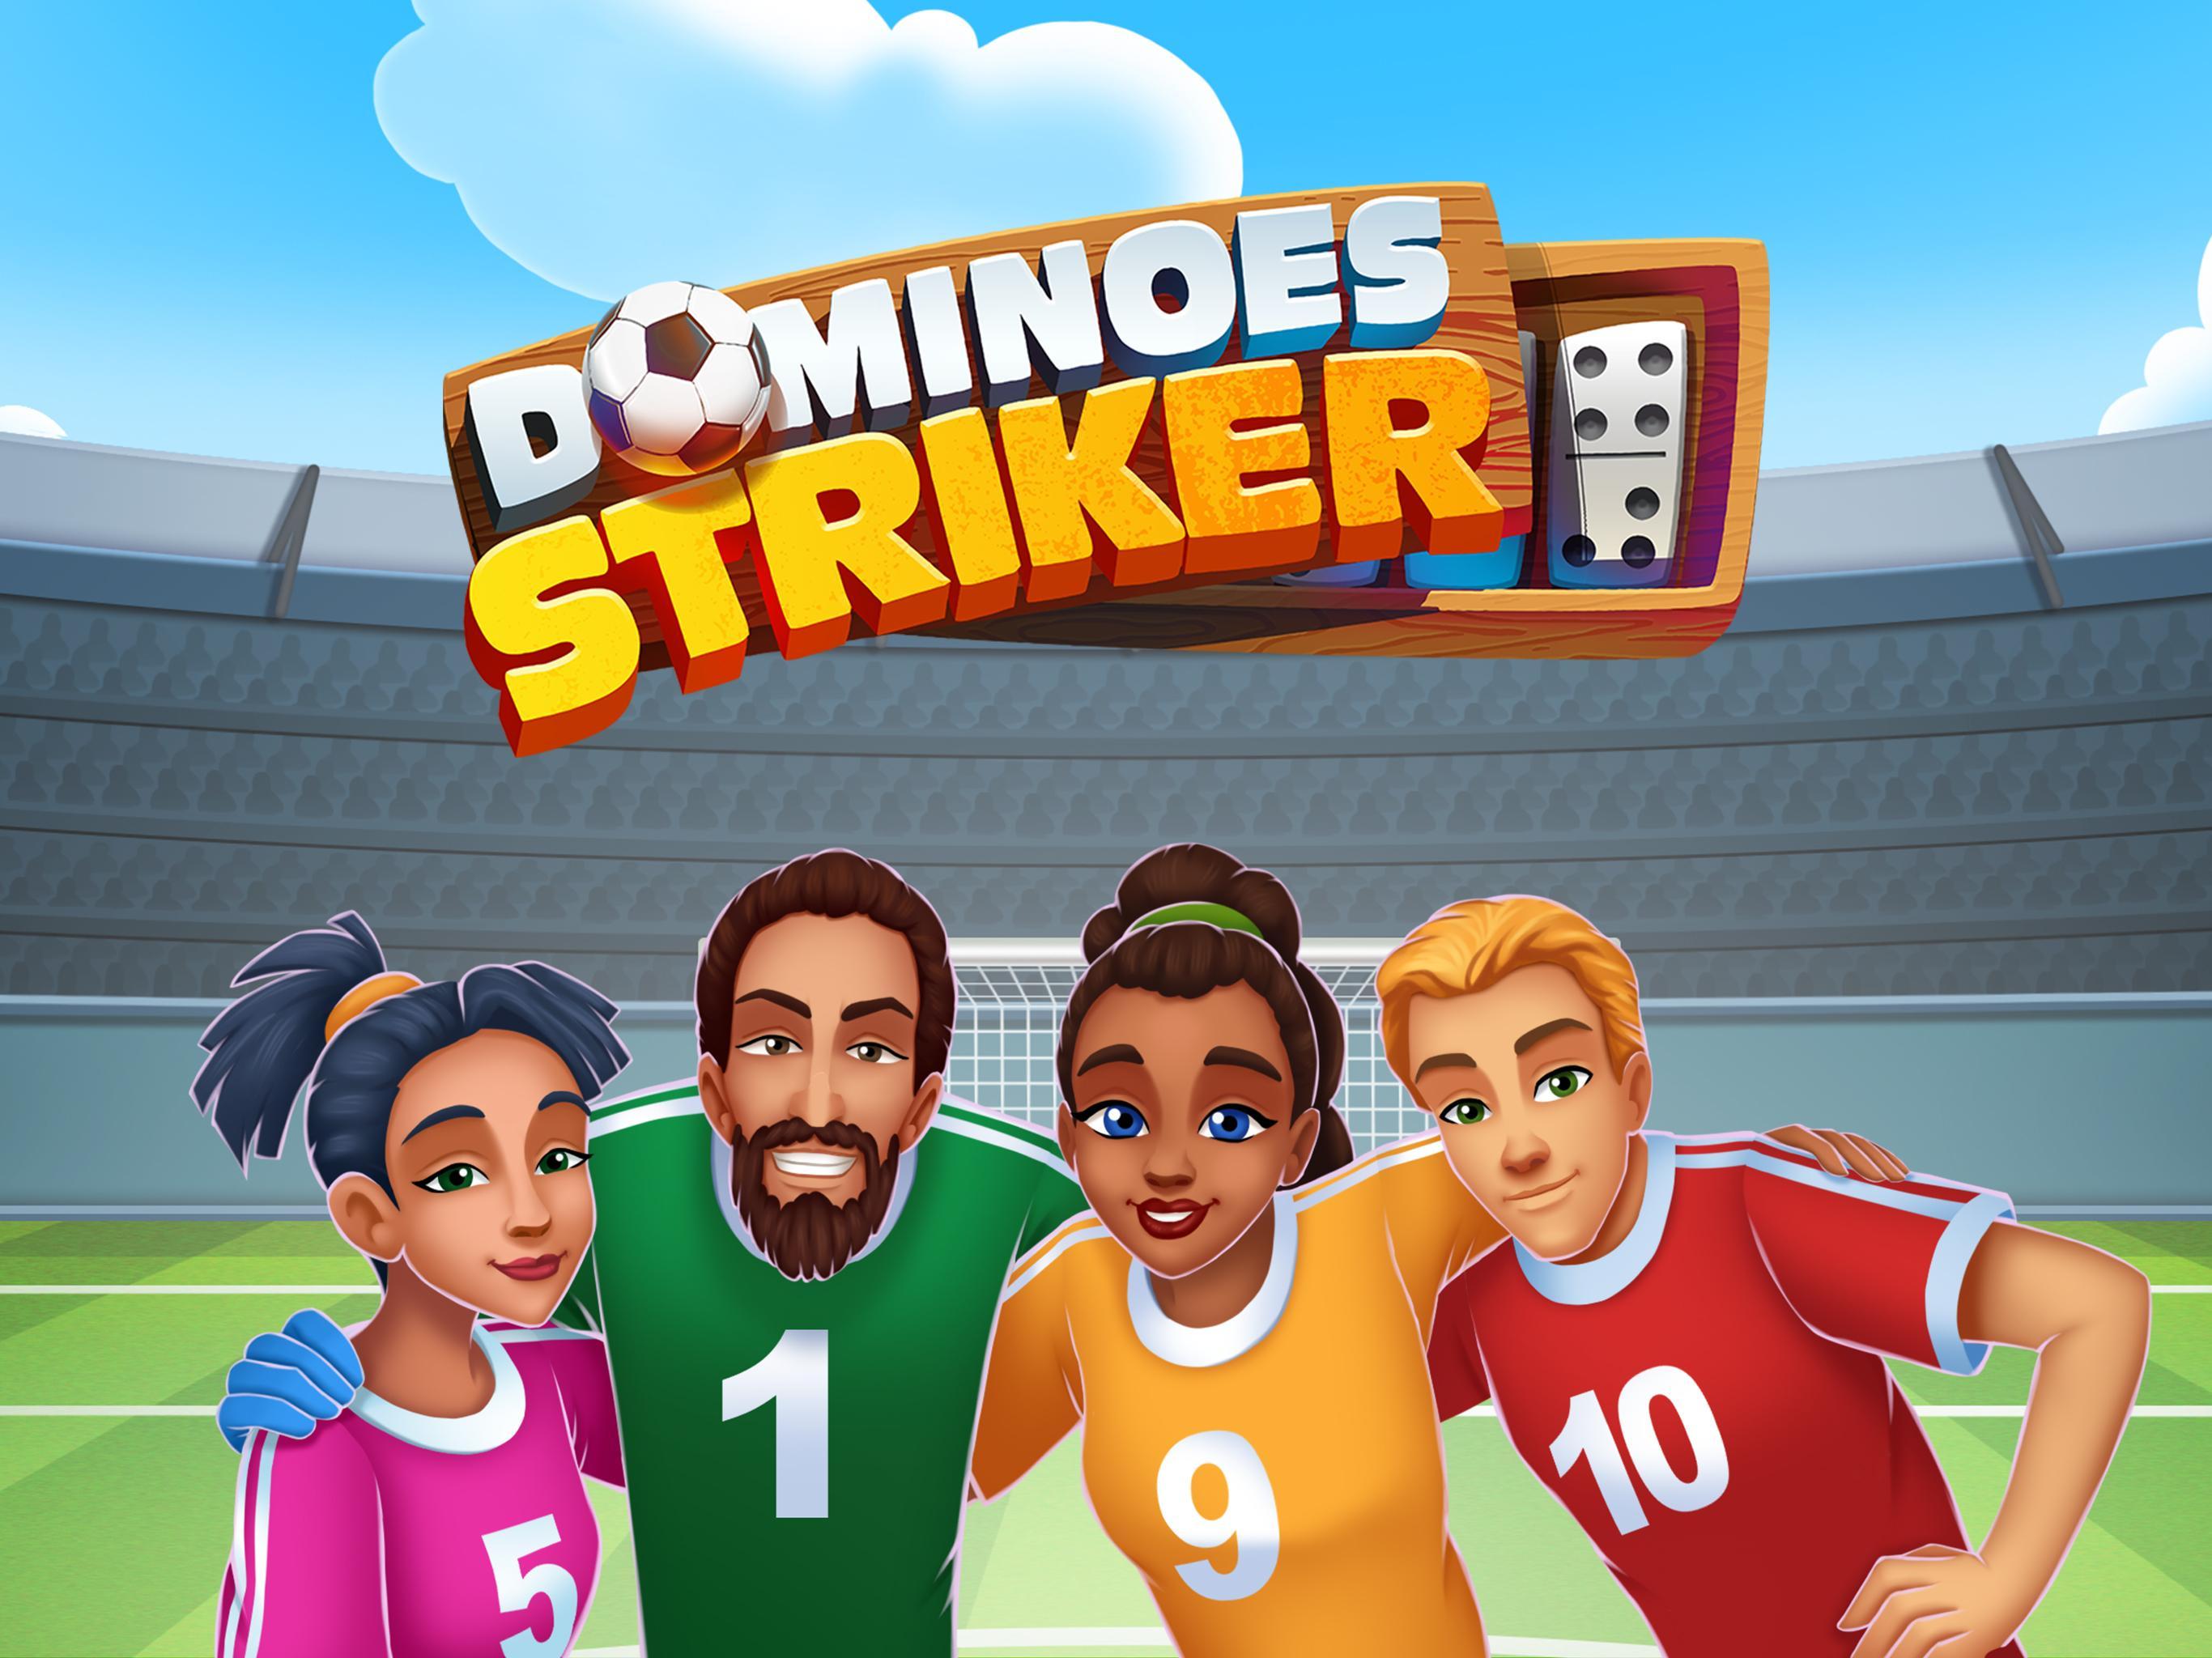 Dominoes Striker: Play Domino with a Soccer blend for Android - APK Download